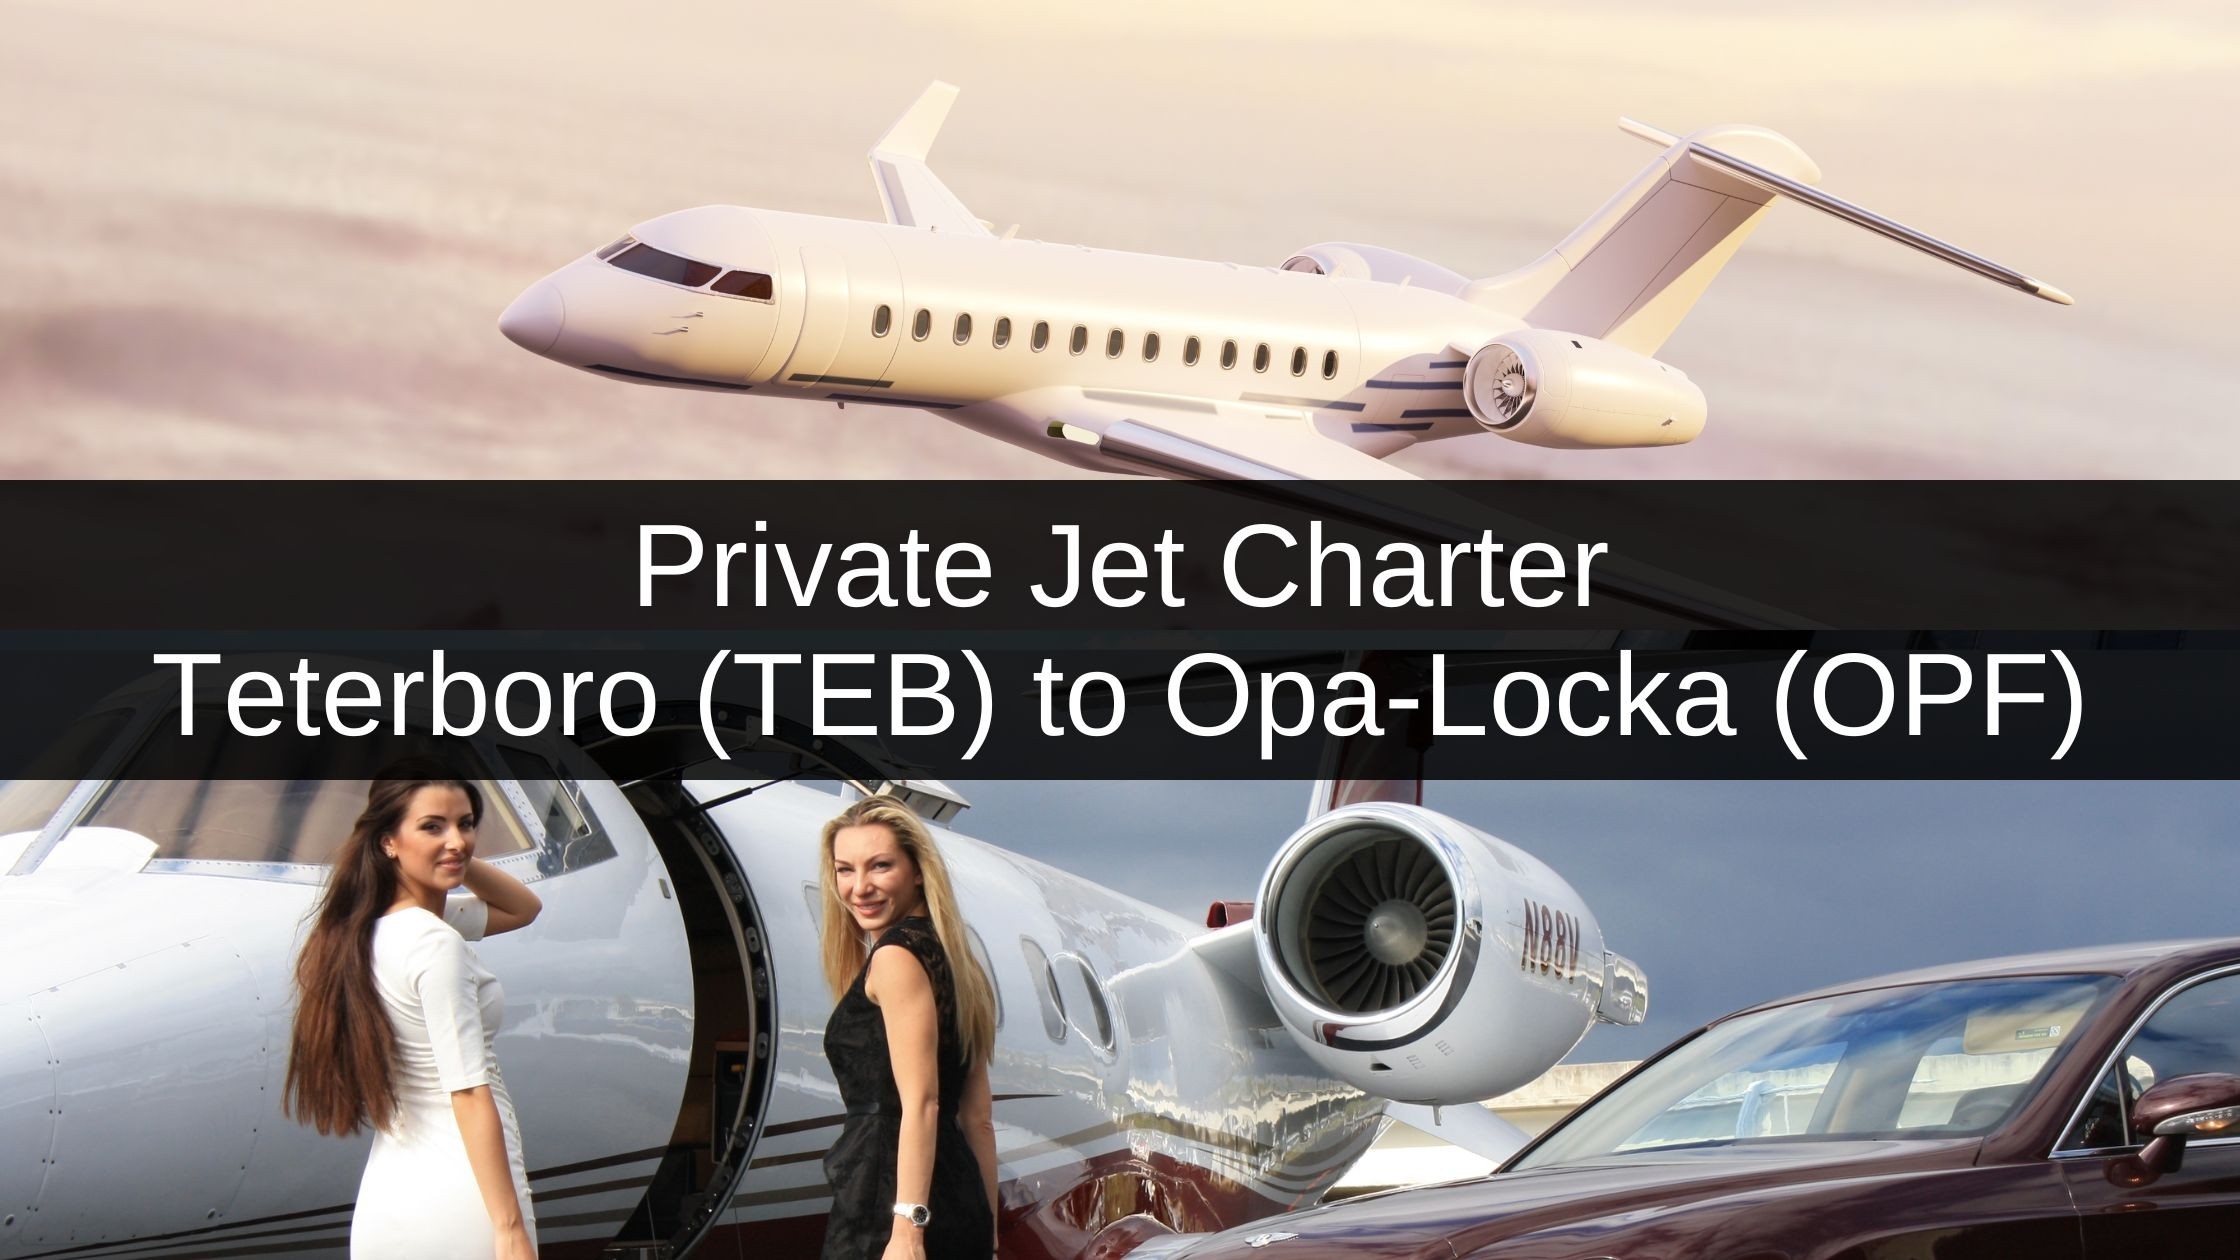 Private Jet Charter from Teterboro Airport (TEB) to Opa-Locka Airport (OPF)